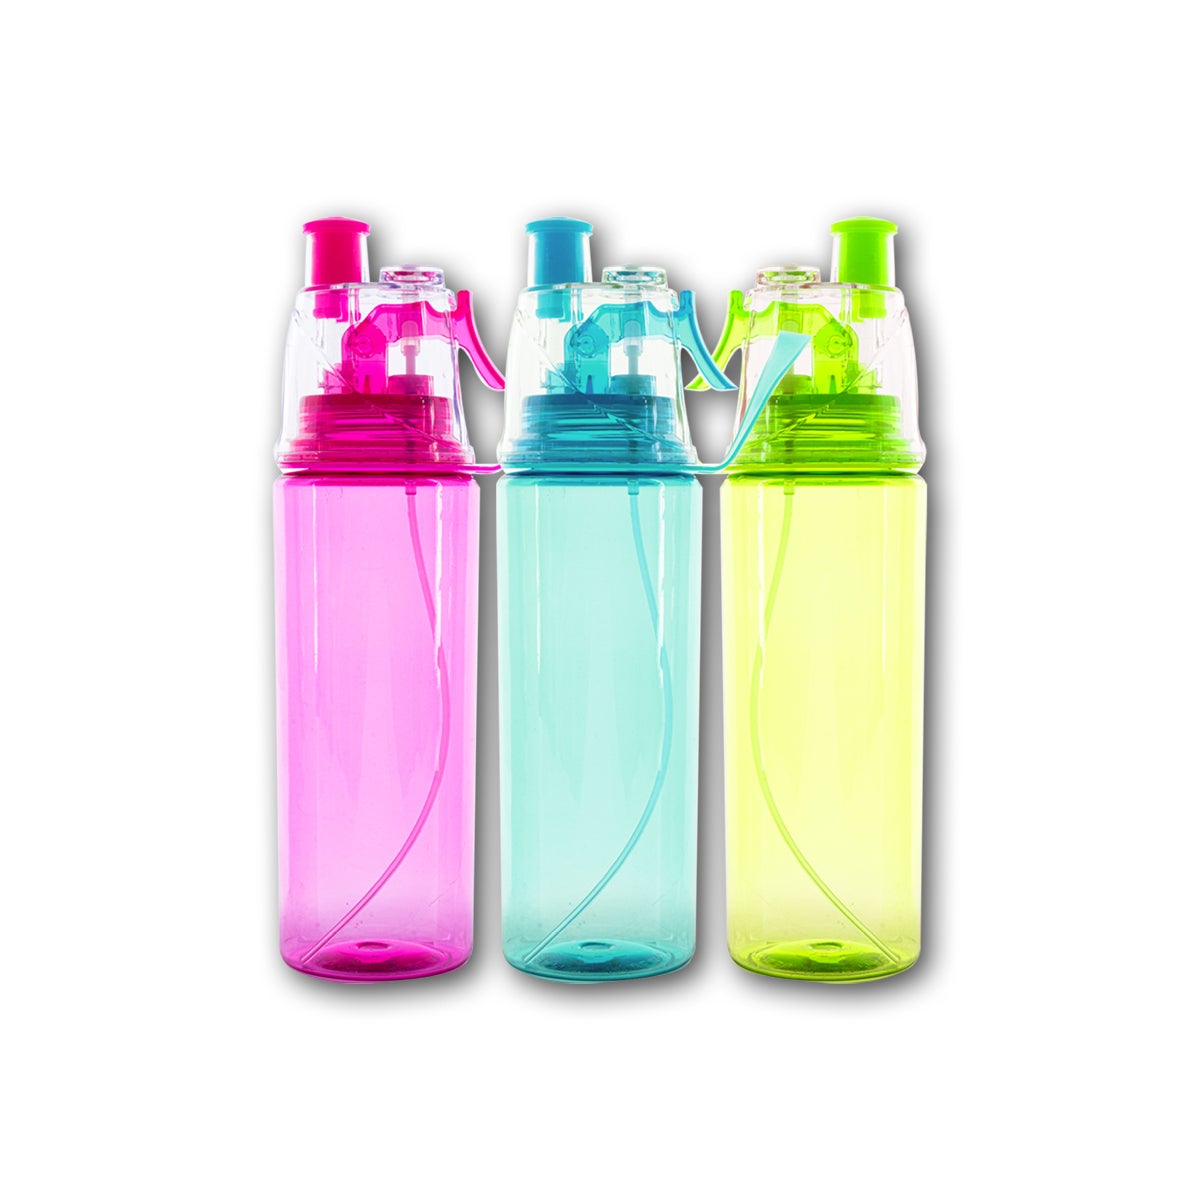 Home Master 3PK Drink Bottle With Misting Spray Carry Loop Value Pack 600ml